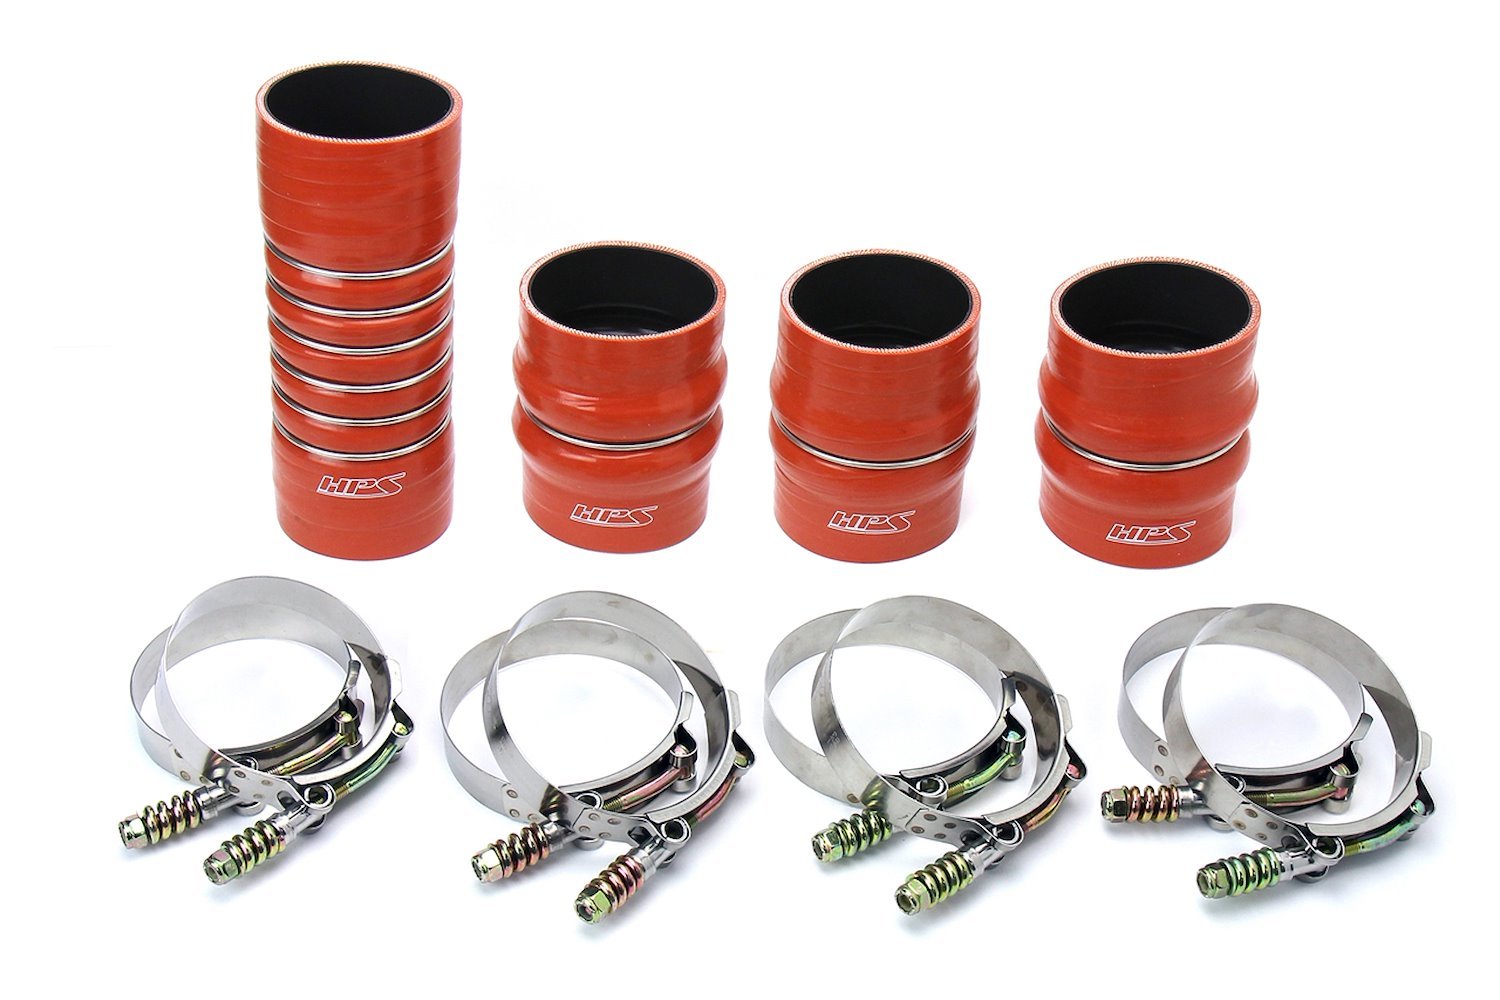 57-1568 Intercooler Hose Kit, High-Temp 4-Ply Reinforced Silicone, Replace OEM Rubber Intercooler Turbo Boots